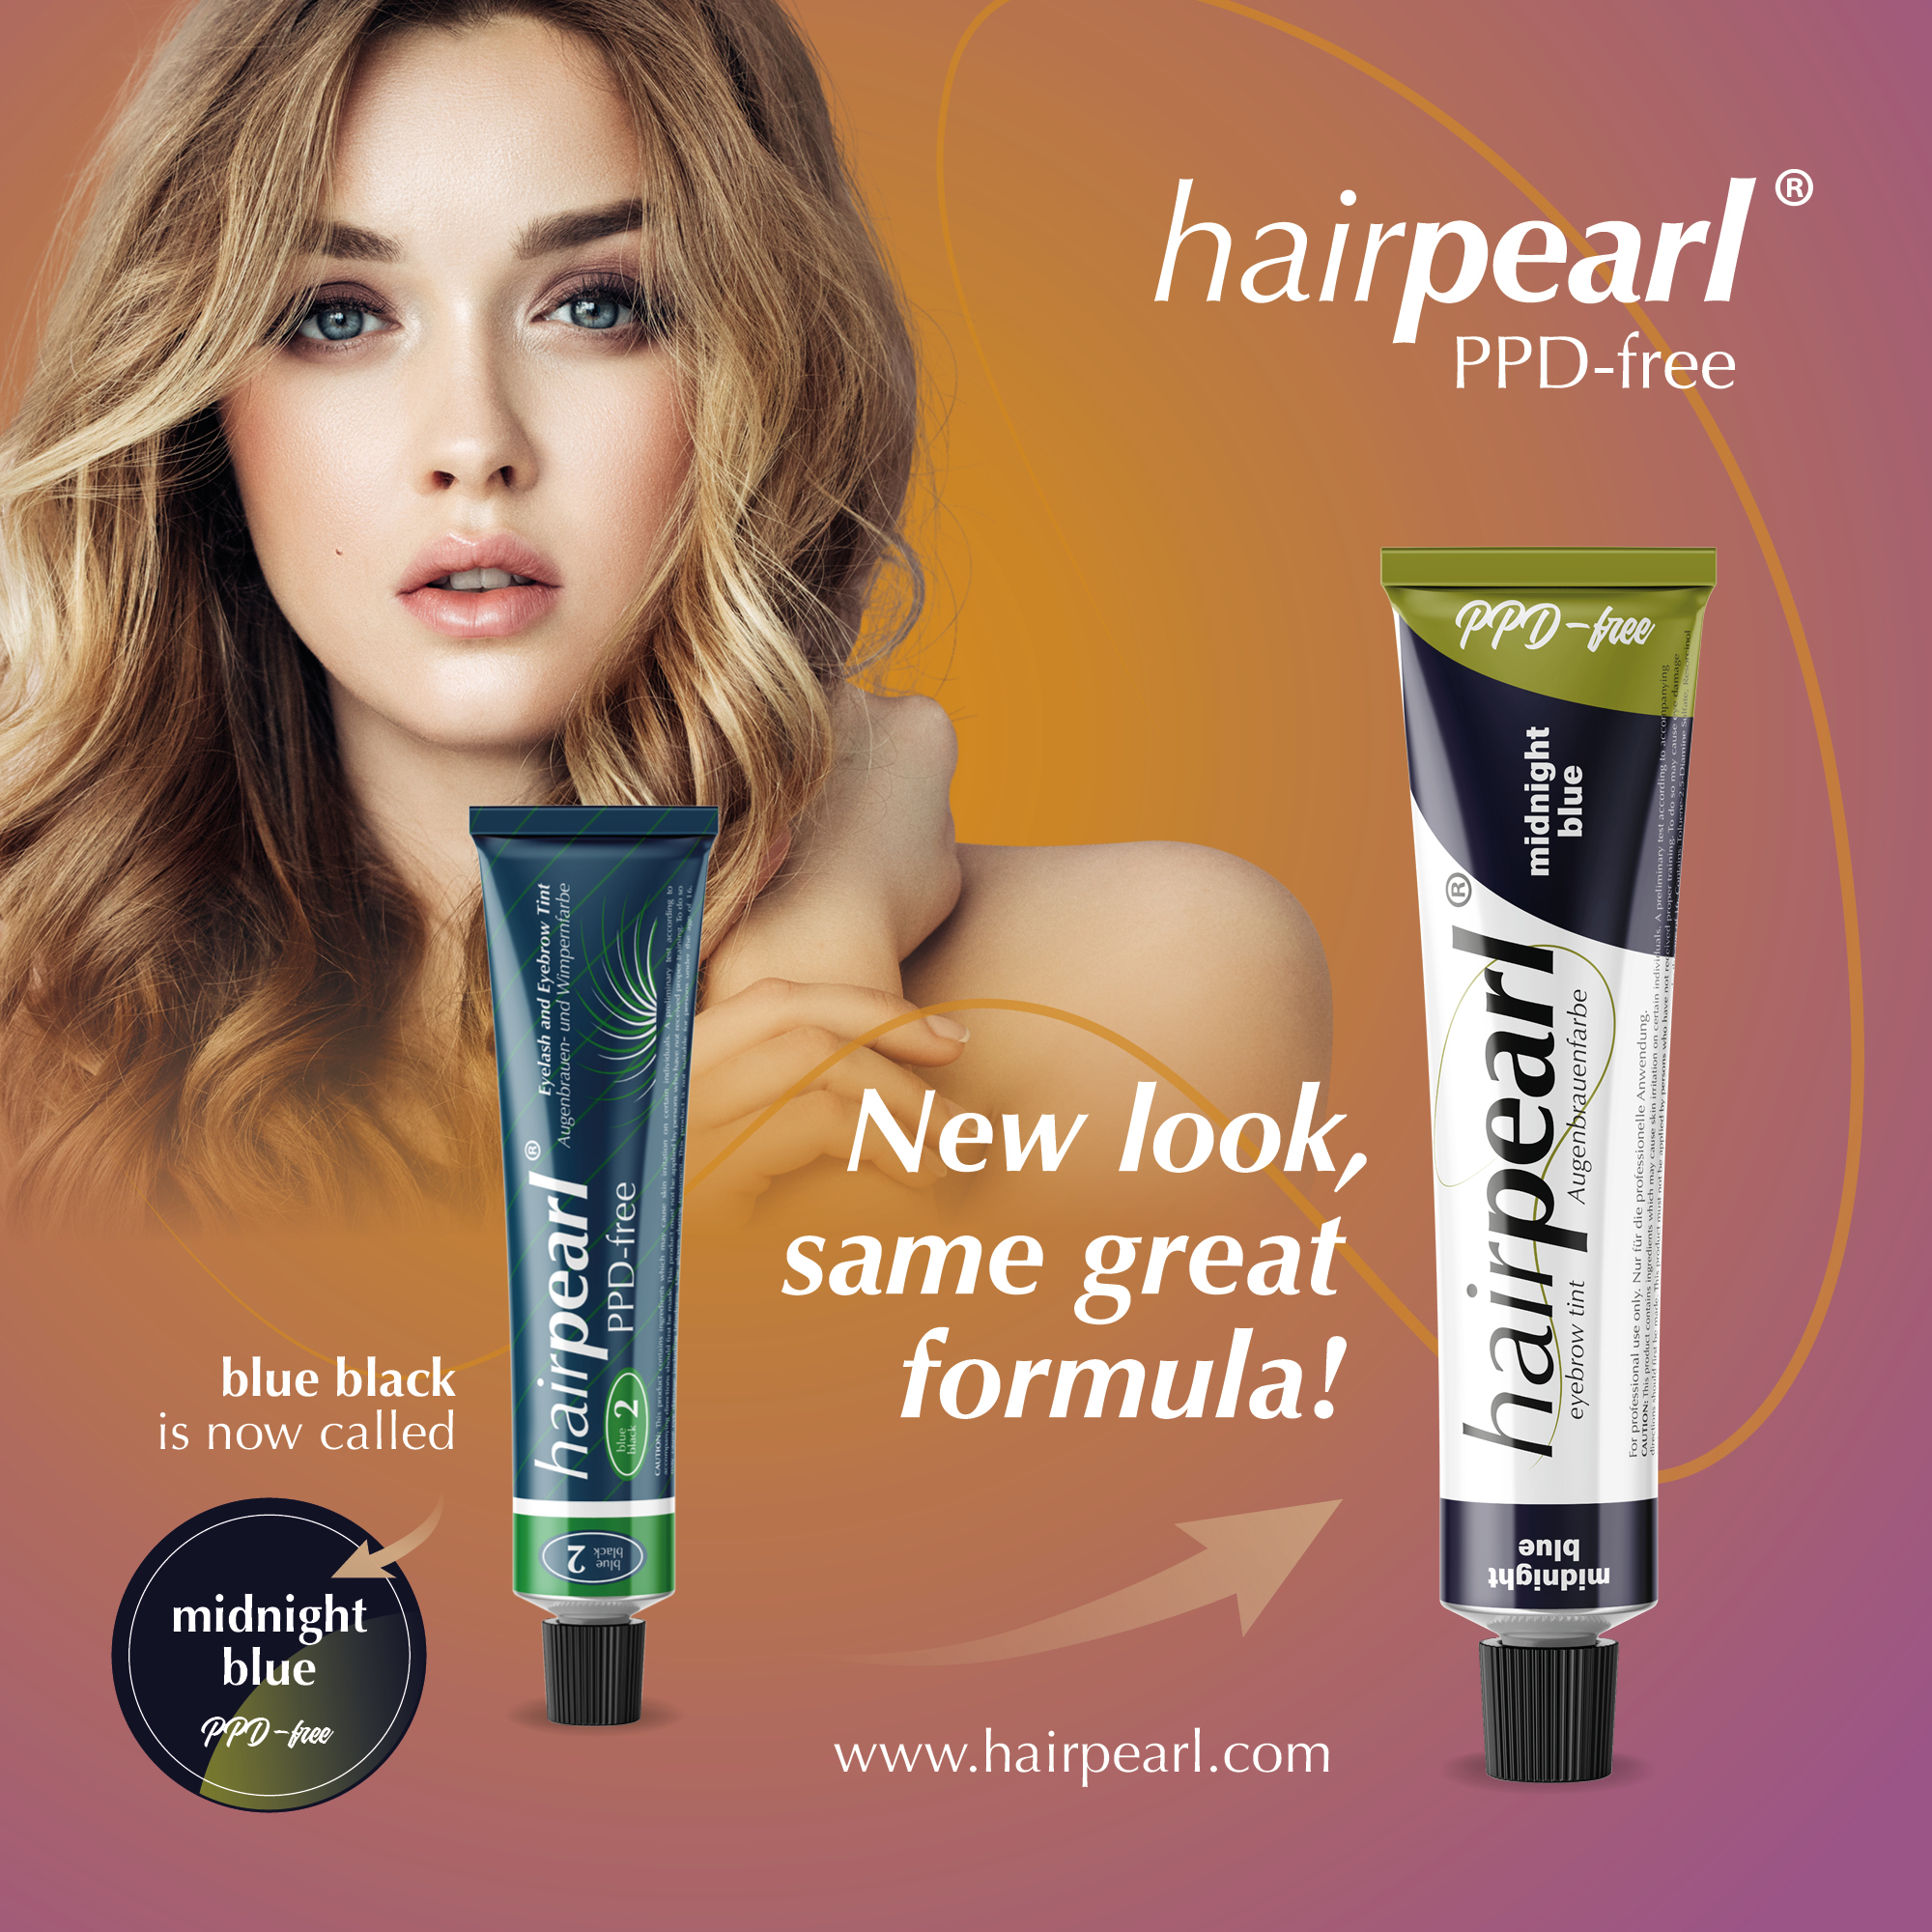 hairpearl PPD-free Eyebrow Tint Midnight Blue – Hairpearl